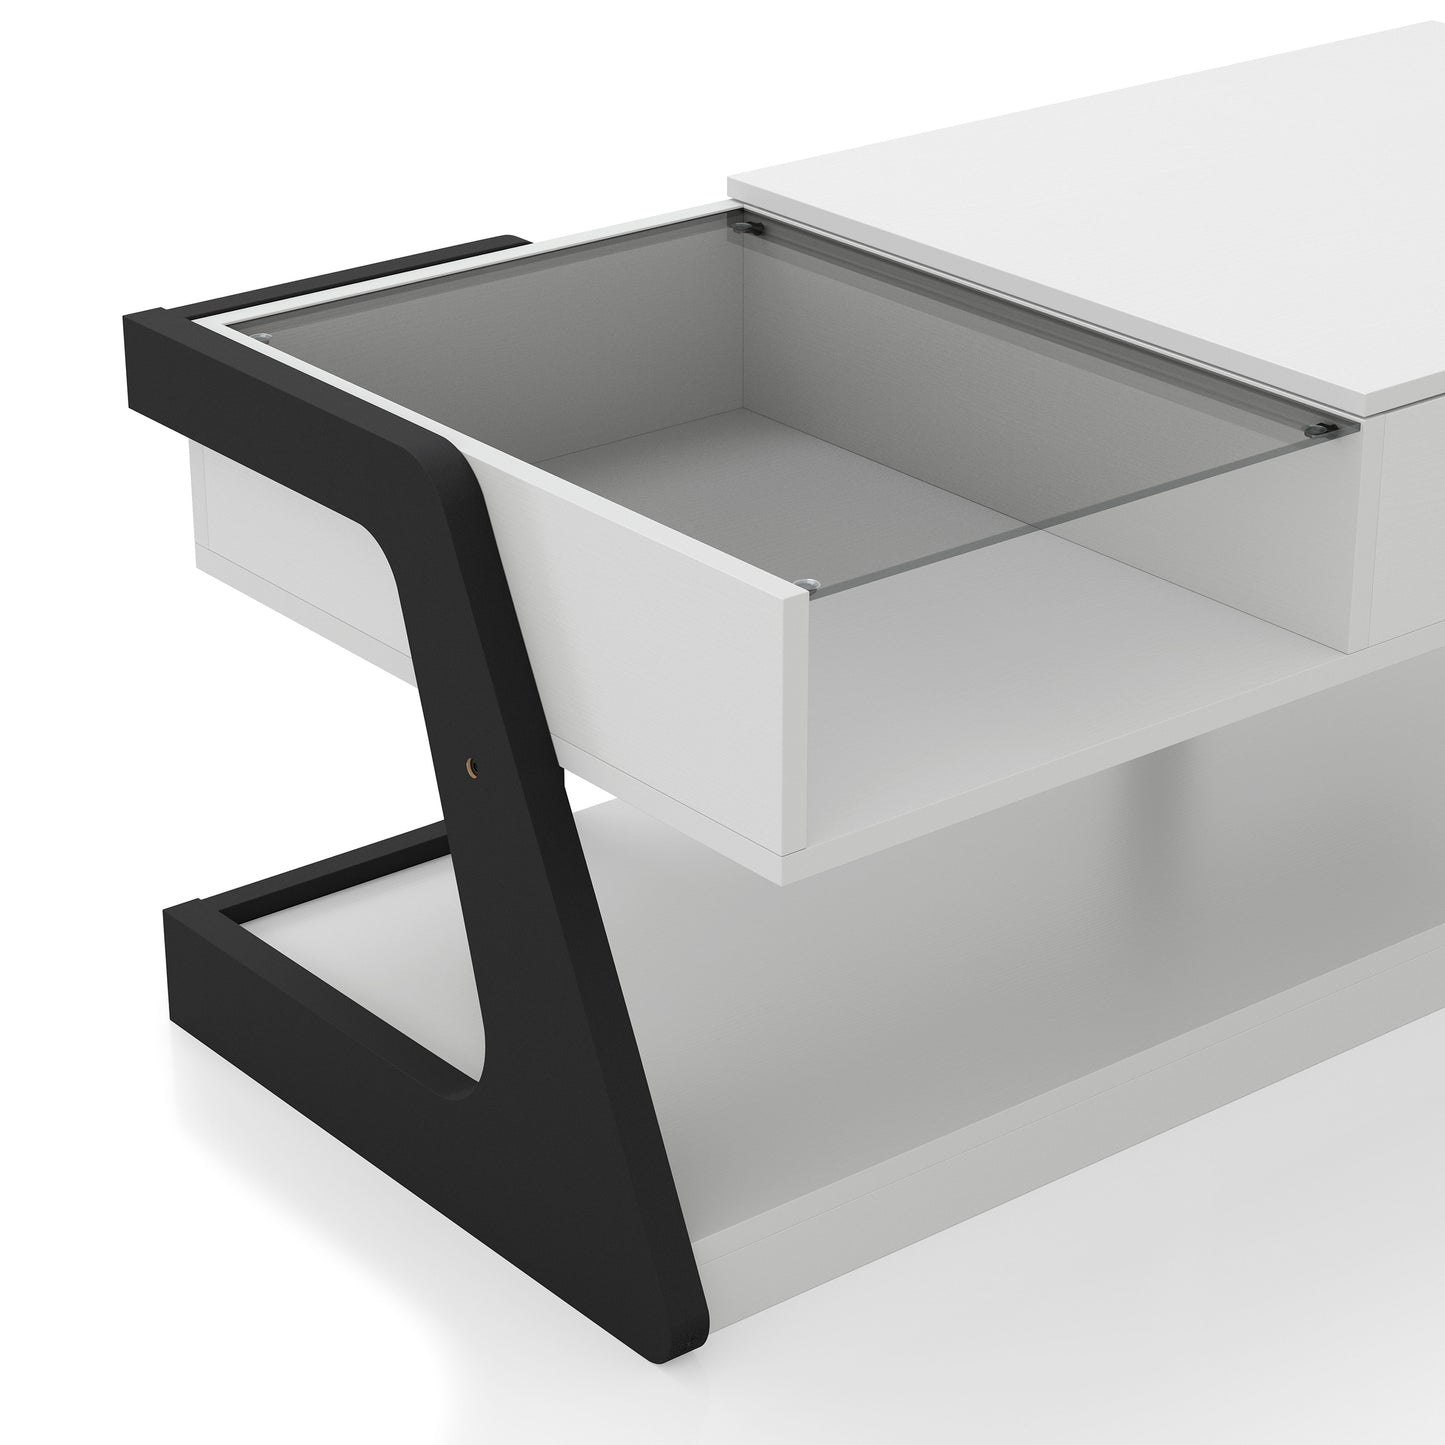 Right angled glass inset close-up view of a contemporary white and black lift-top storage coffee table with two shelves on a white background